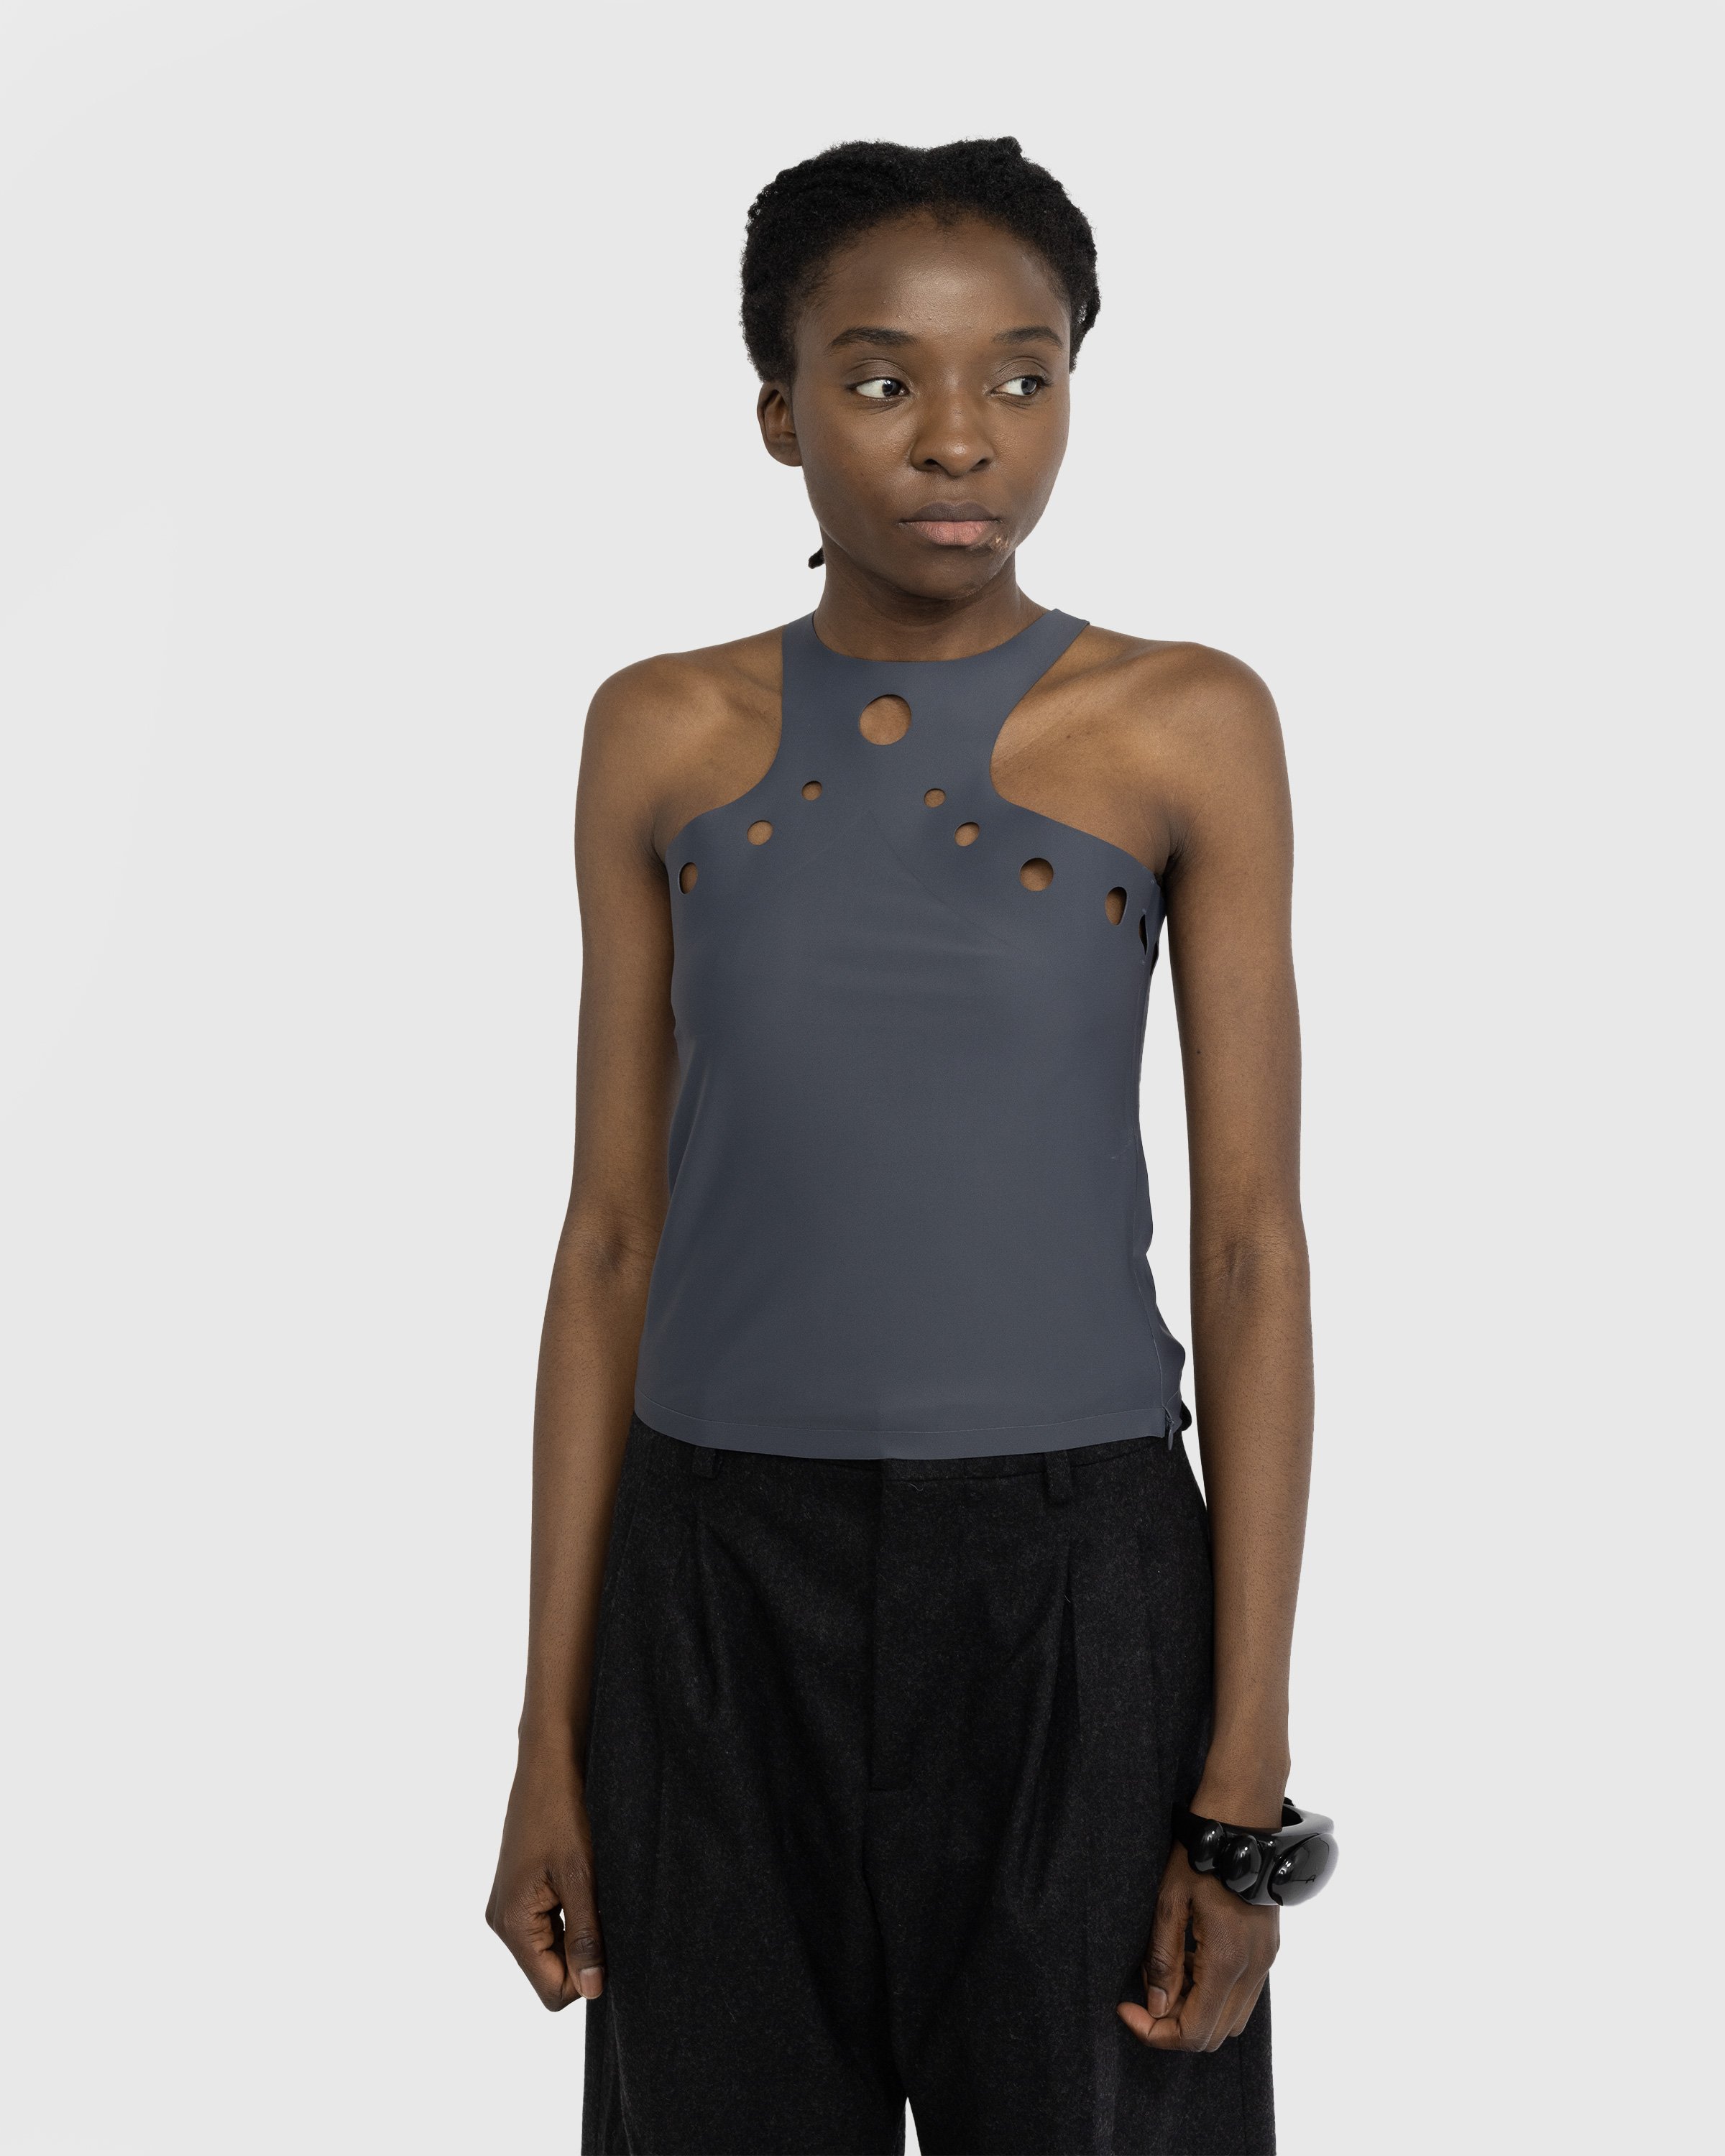 Jean Paul Gaultier - Perforated Details Tanktop - Clothing - Grey - Image 6